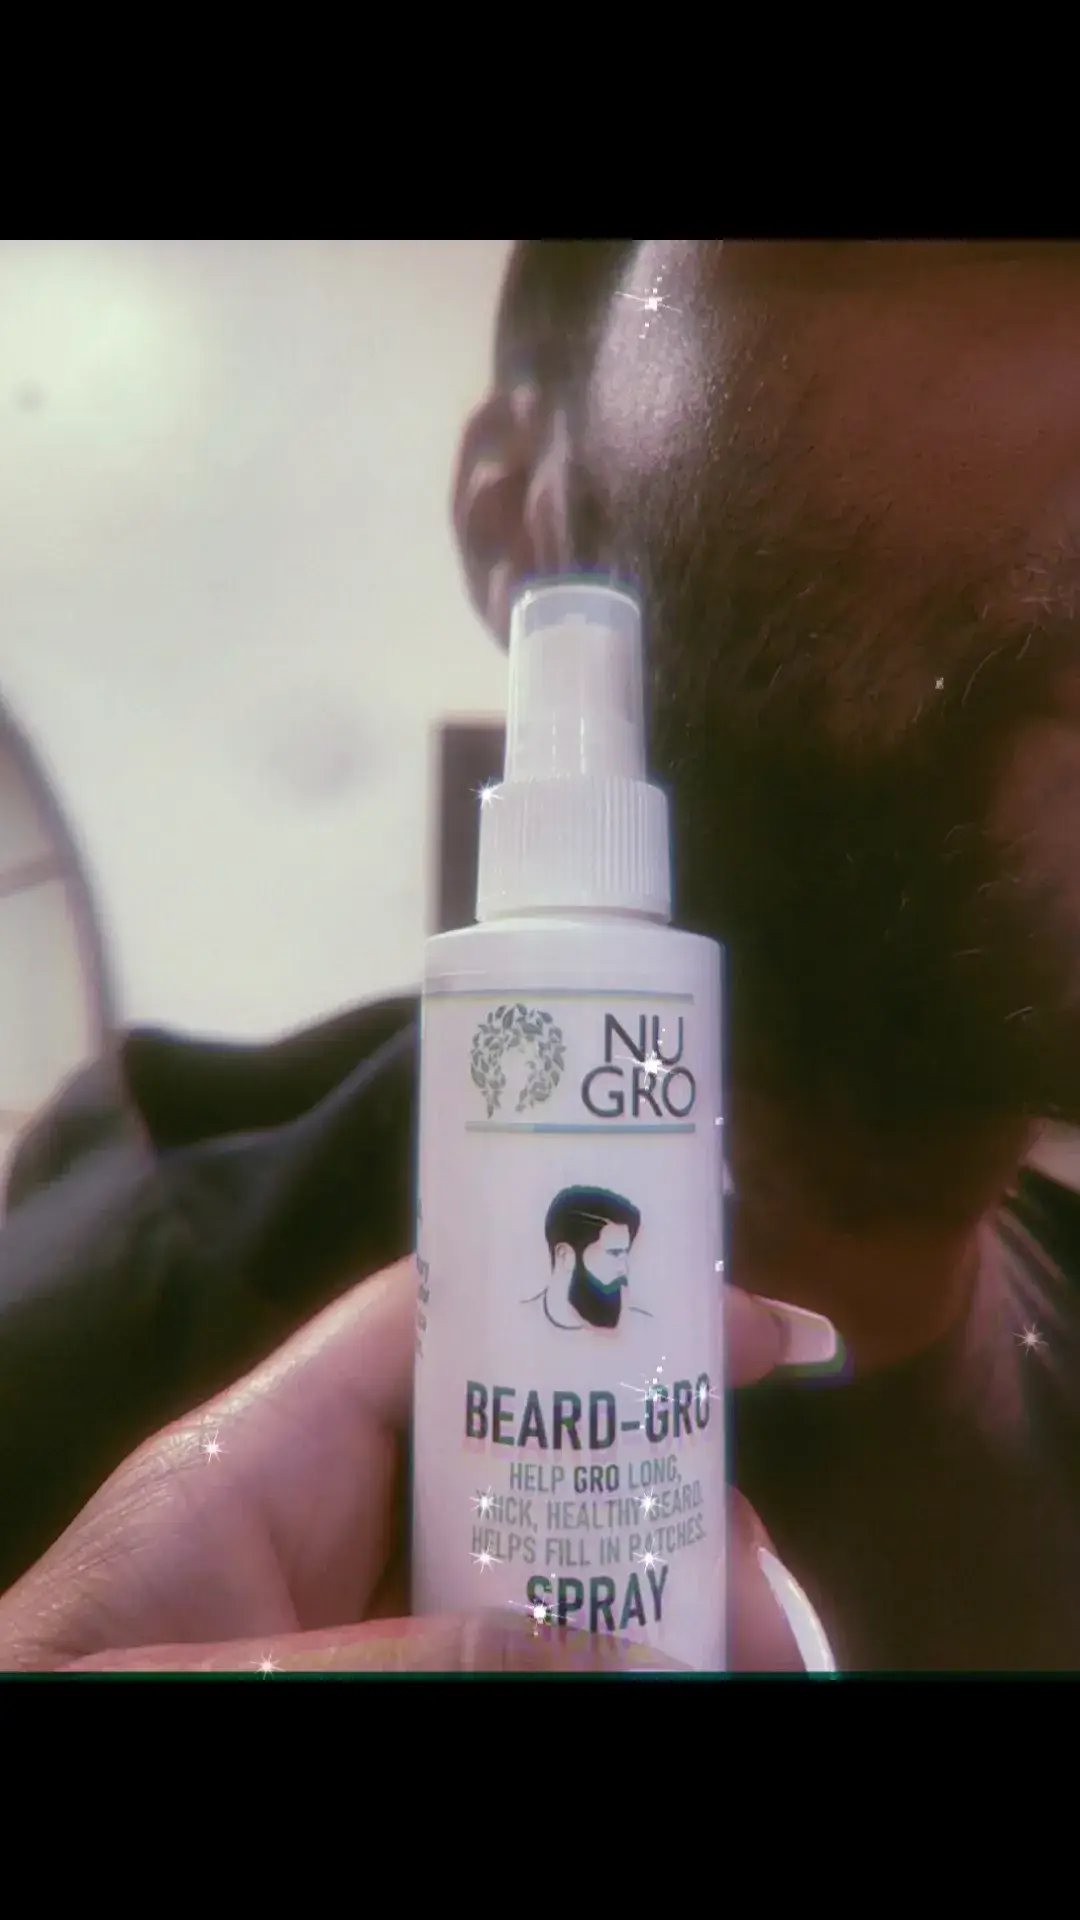 Rise and shine, kings! It's Hump Day, and you know what that means – time to conquer the rest of the week with confidence and style. Start your day right with NUGRO Beard Gro and slay those midweek blues! 💪🏾💼 Find linktr.ee/nugrohair or you local beauty supply store.   #HumpDayMotivation #BeardGROConfidence #MidweekMotivation #BeardGROStrength #BeardGROConfidence #HumpDayHustle #WinningWednesday #BeardGROSuccess #HumpDayVibe #BeardGROVictory #beardtok #hairfyp #beardfyp 